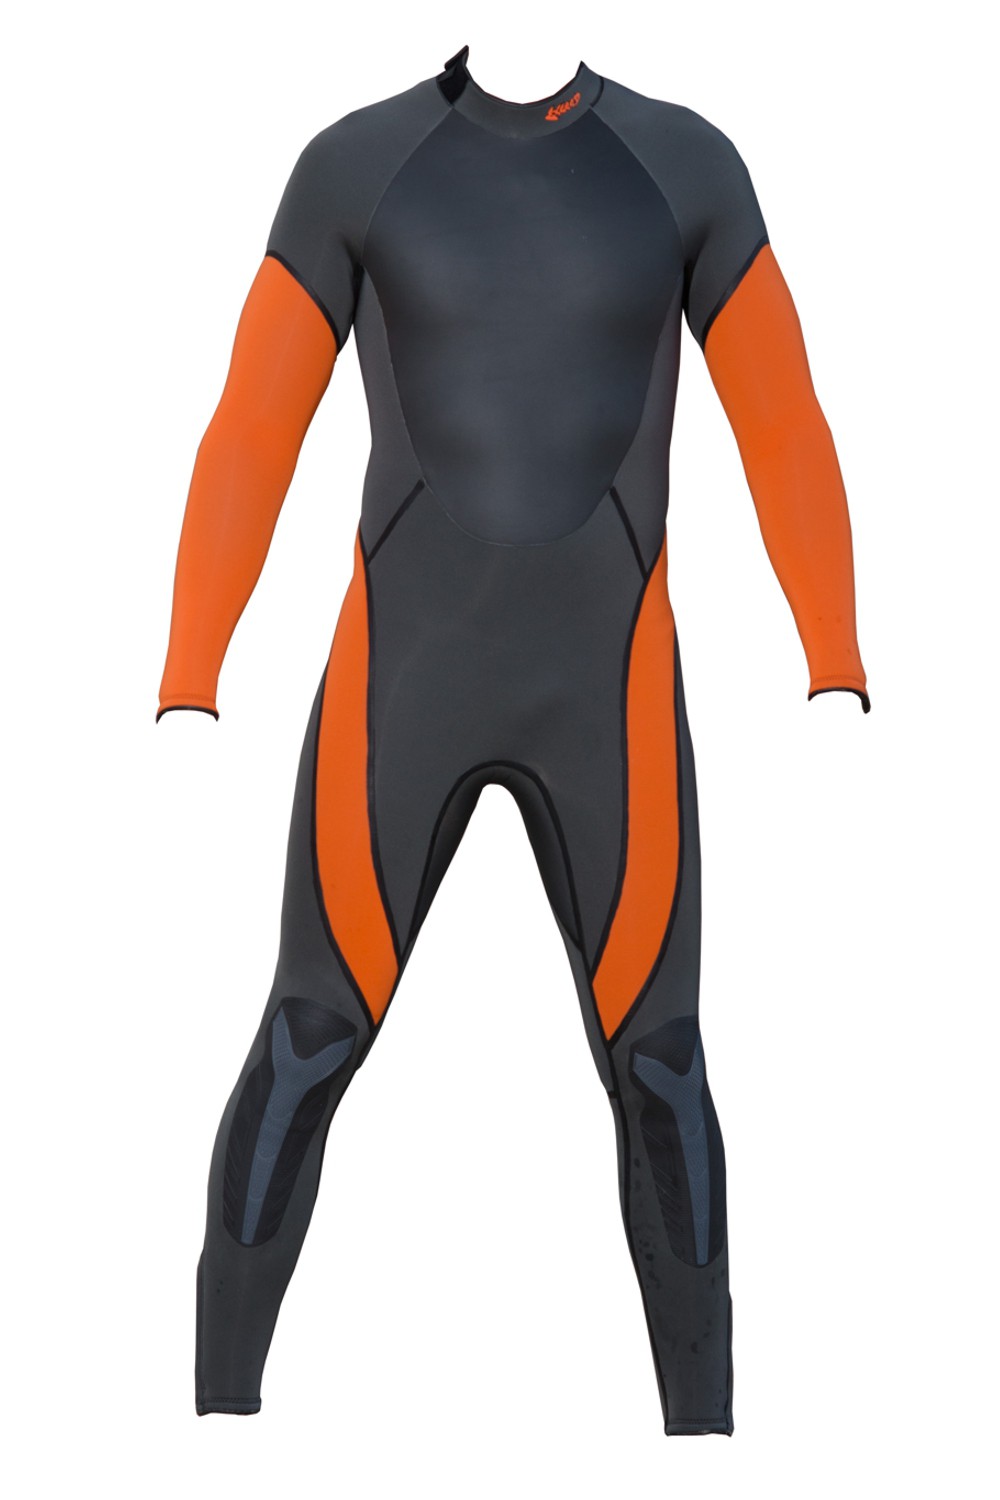 Exceed Electro Mens 5/4mm Full Wetsuit